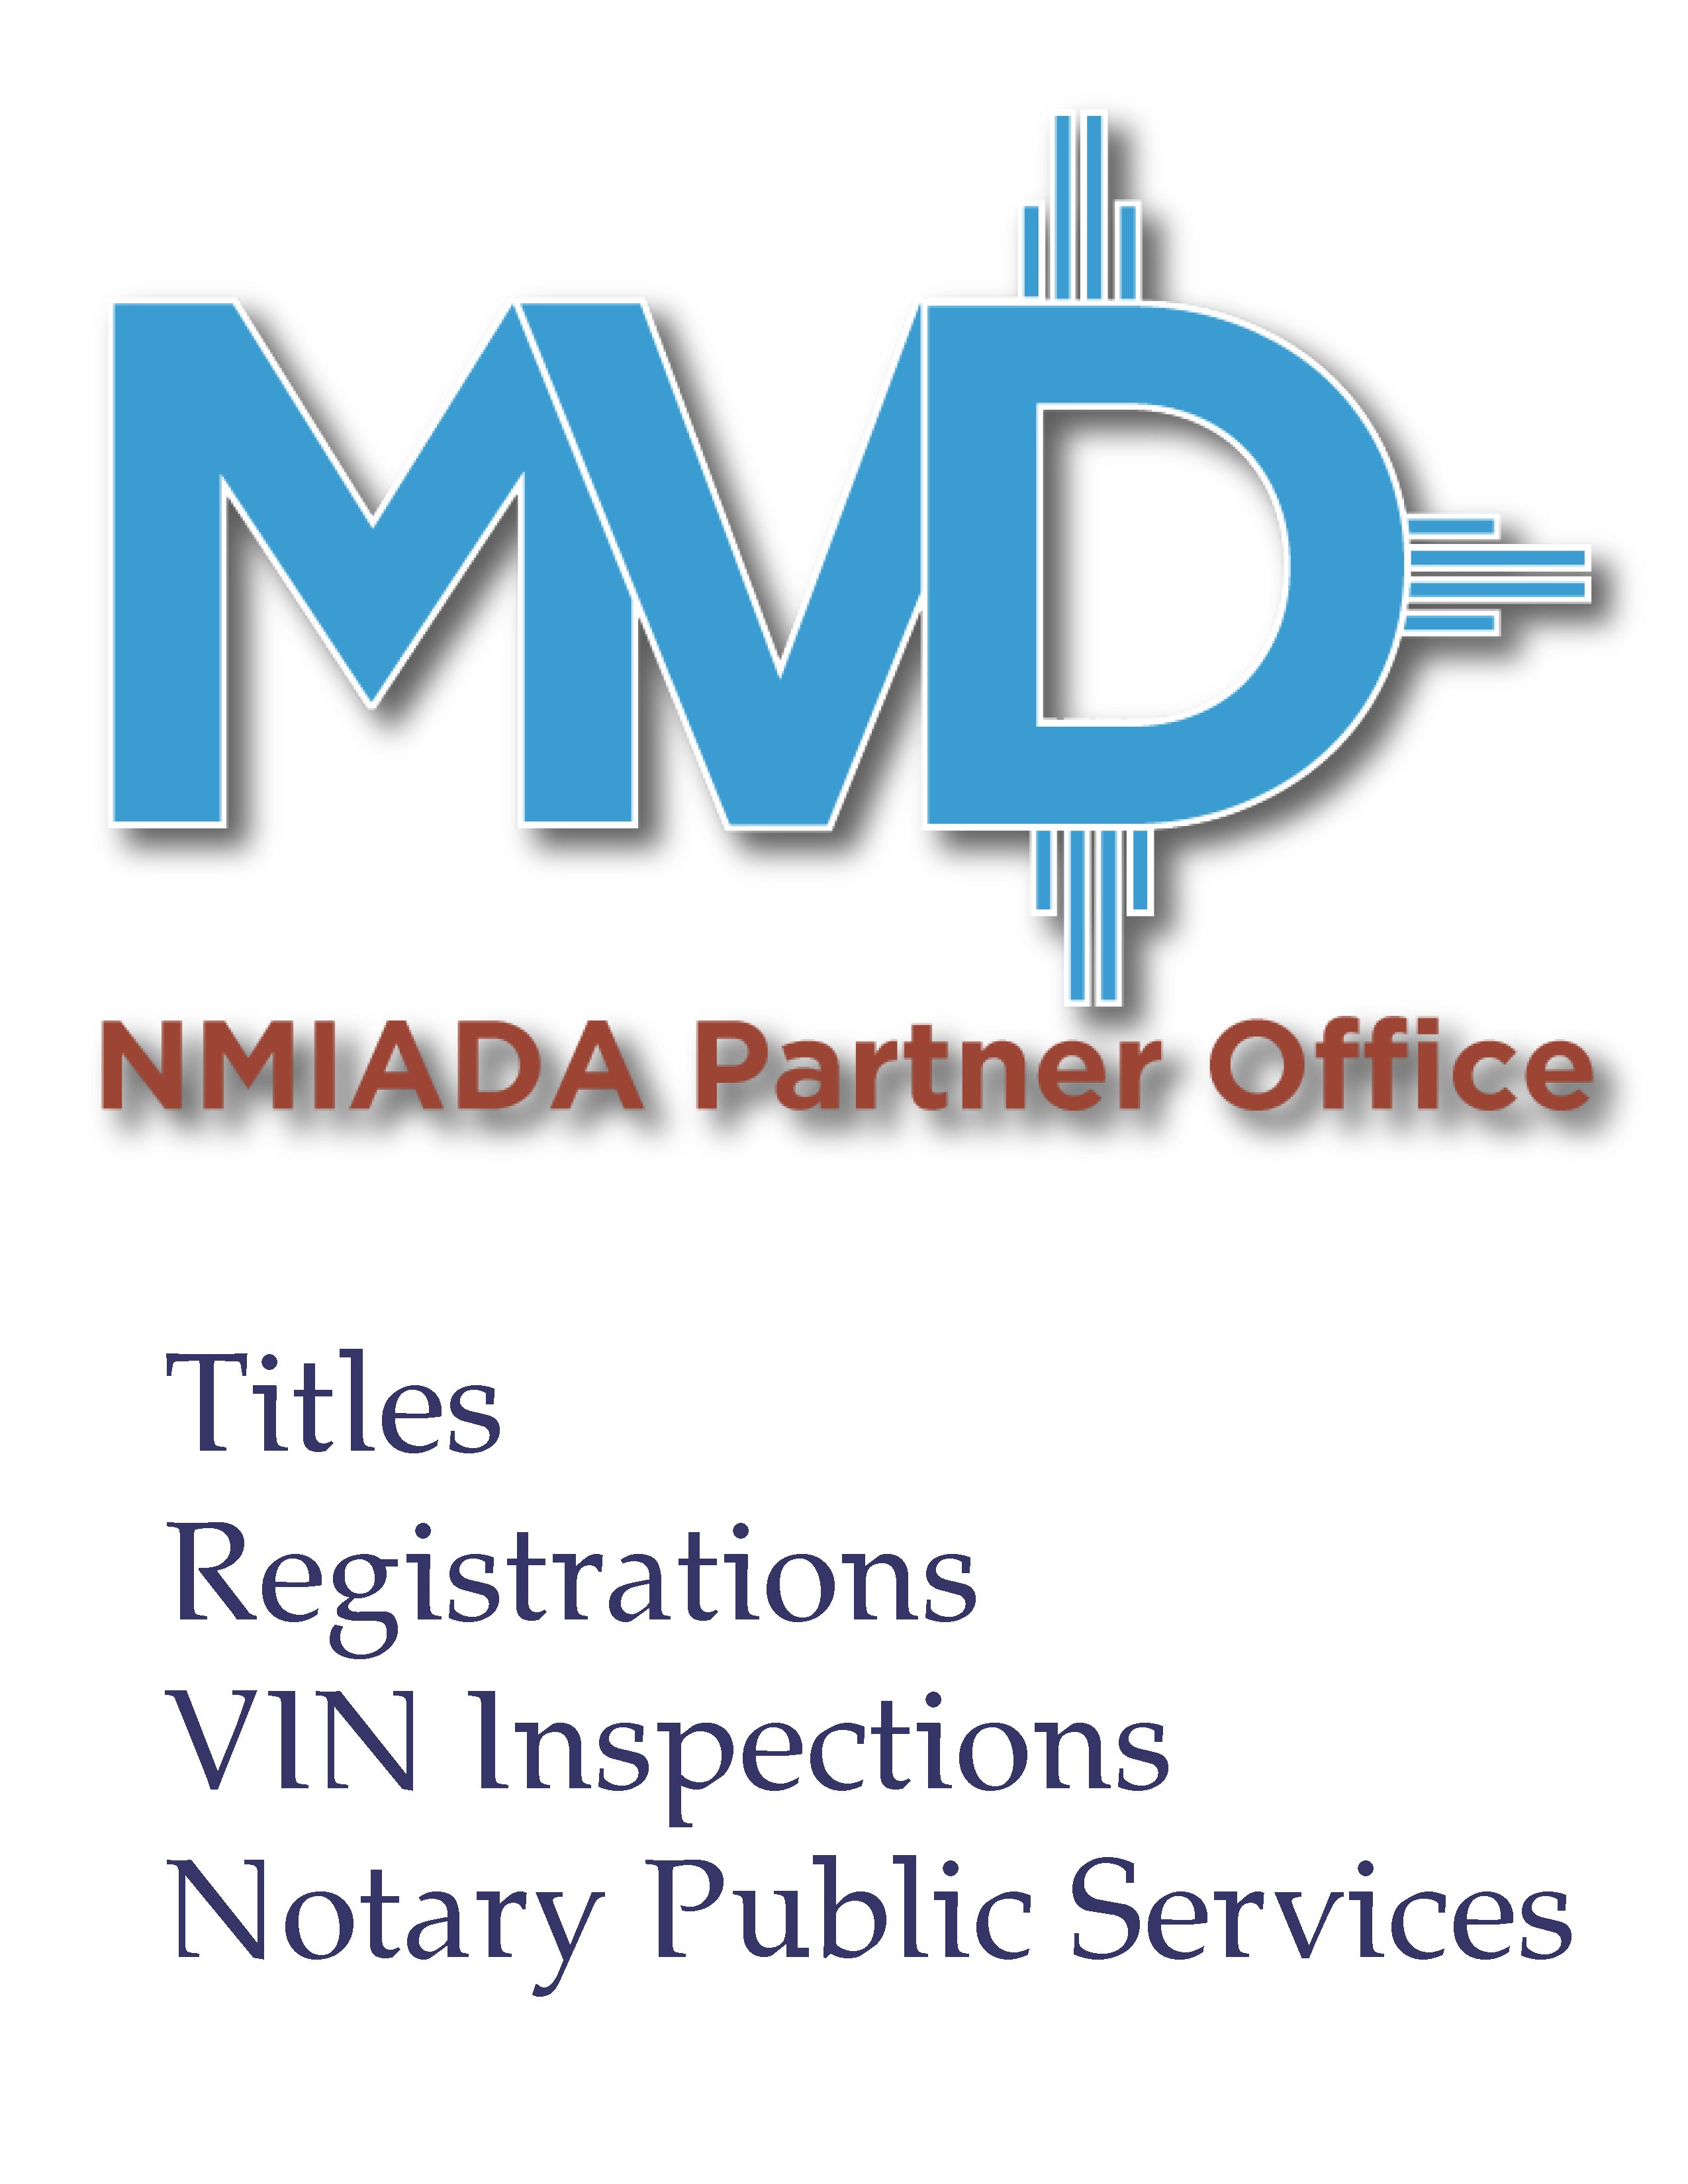 NMIADA Partner Office Services